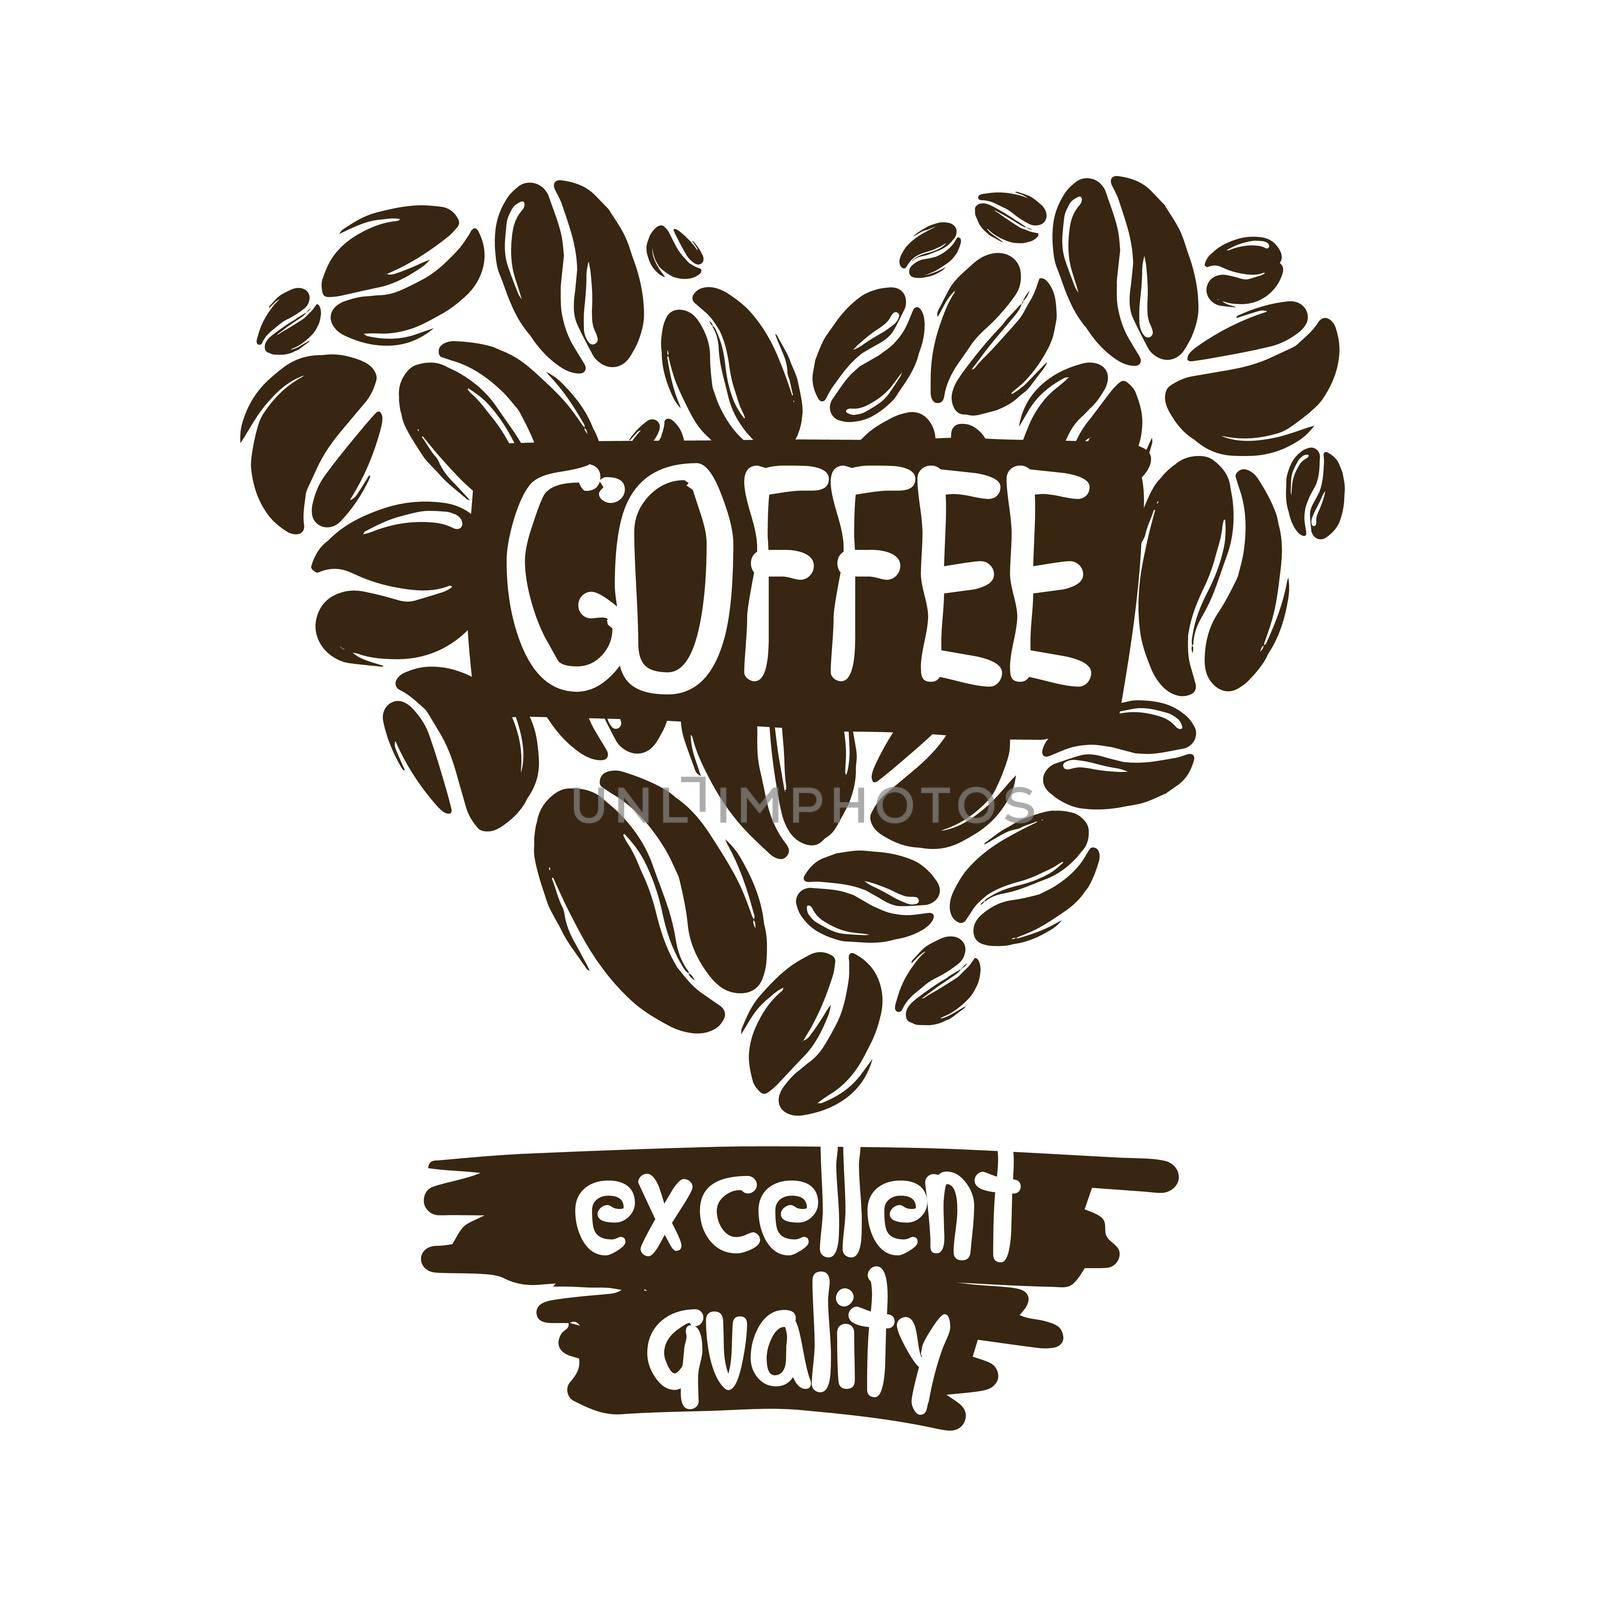 Heart of coffee beans on a white background. Vector logo on a white background.